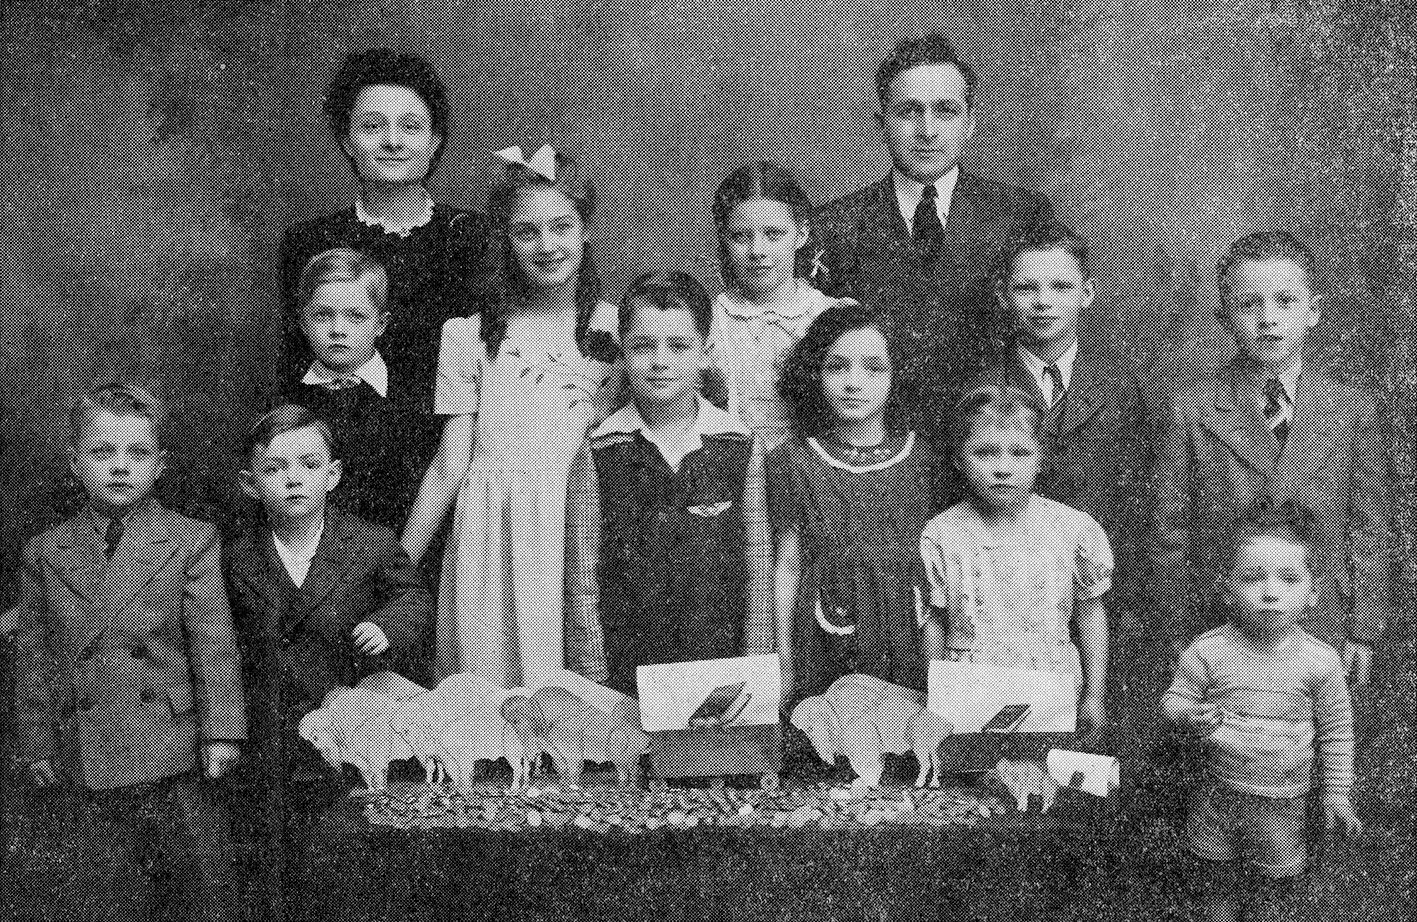 Dominic and Helen Defino, with children